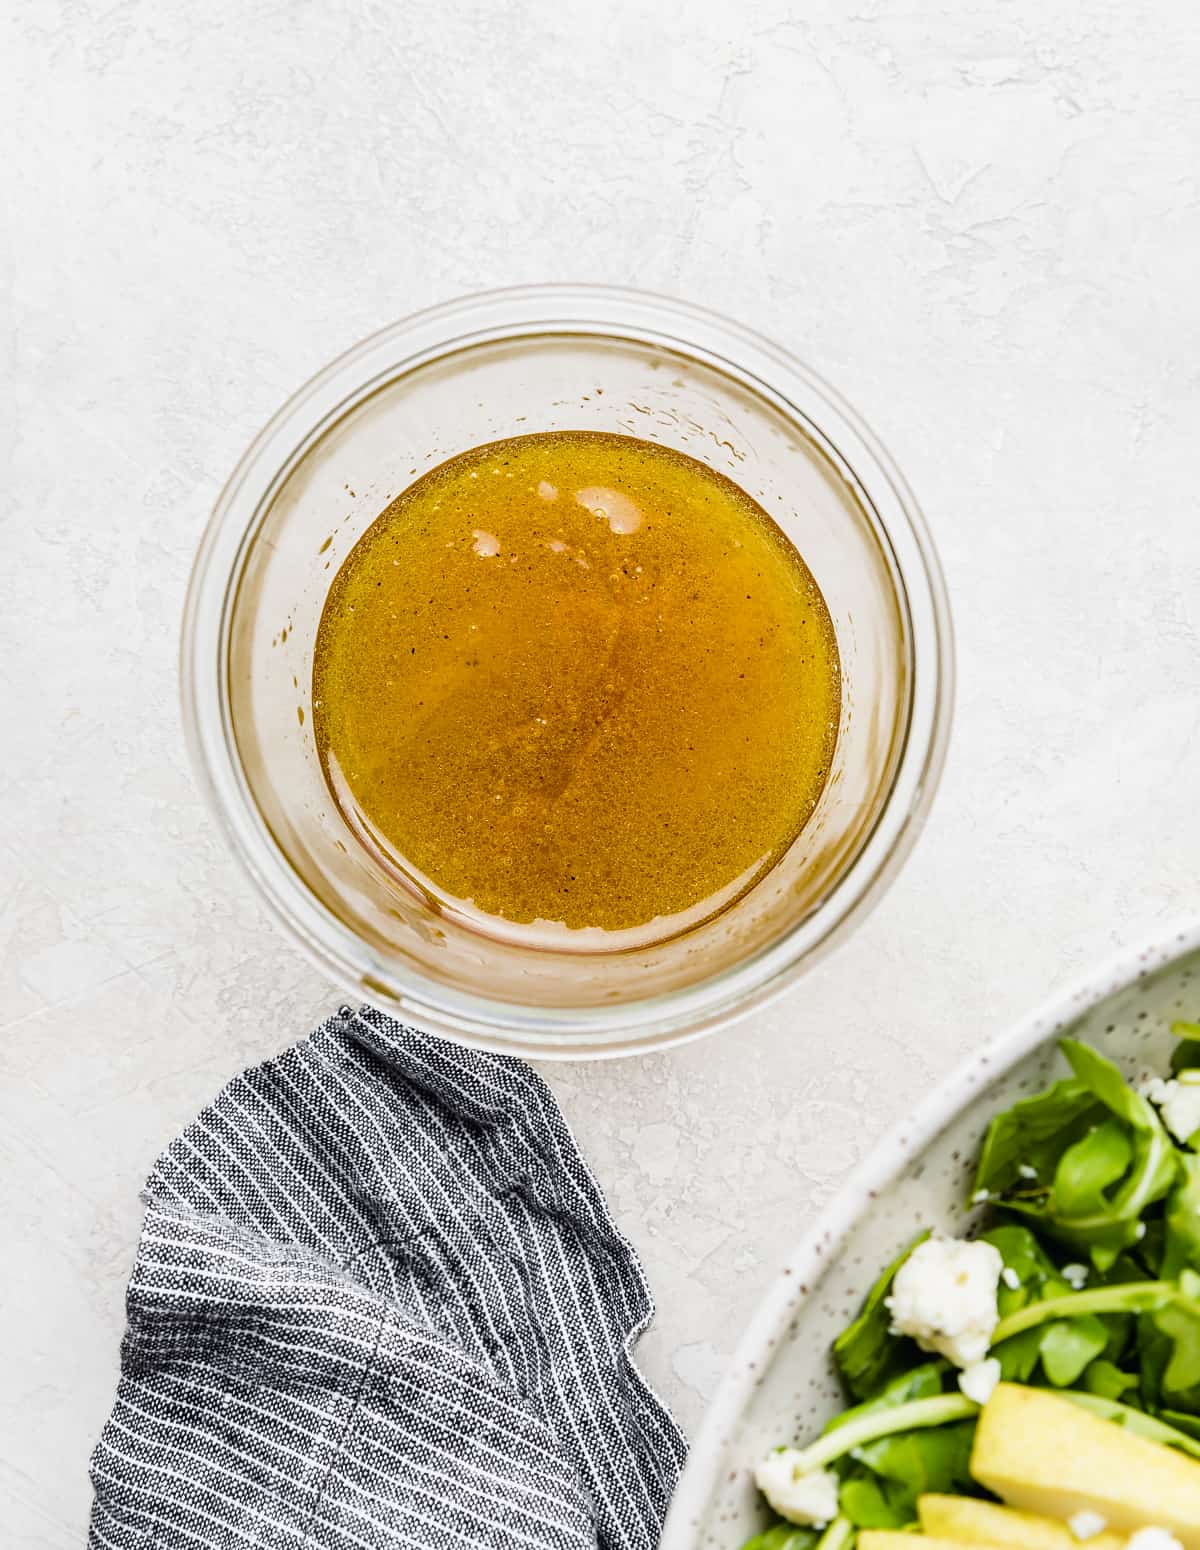 Rocket and Pear Salad dressing in a glass jar on a white background.